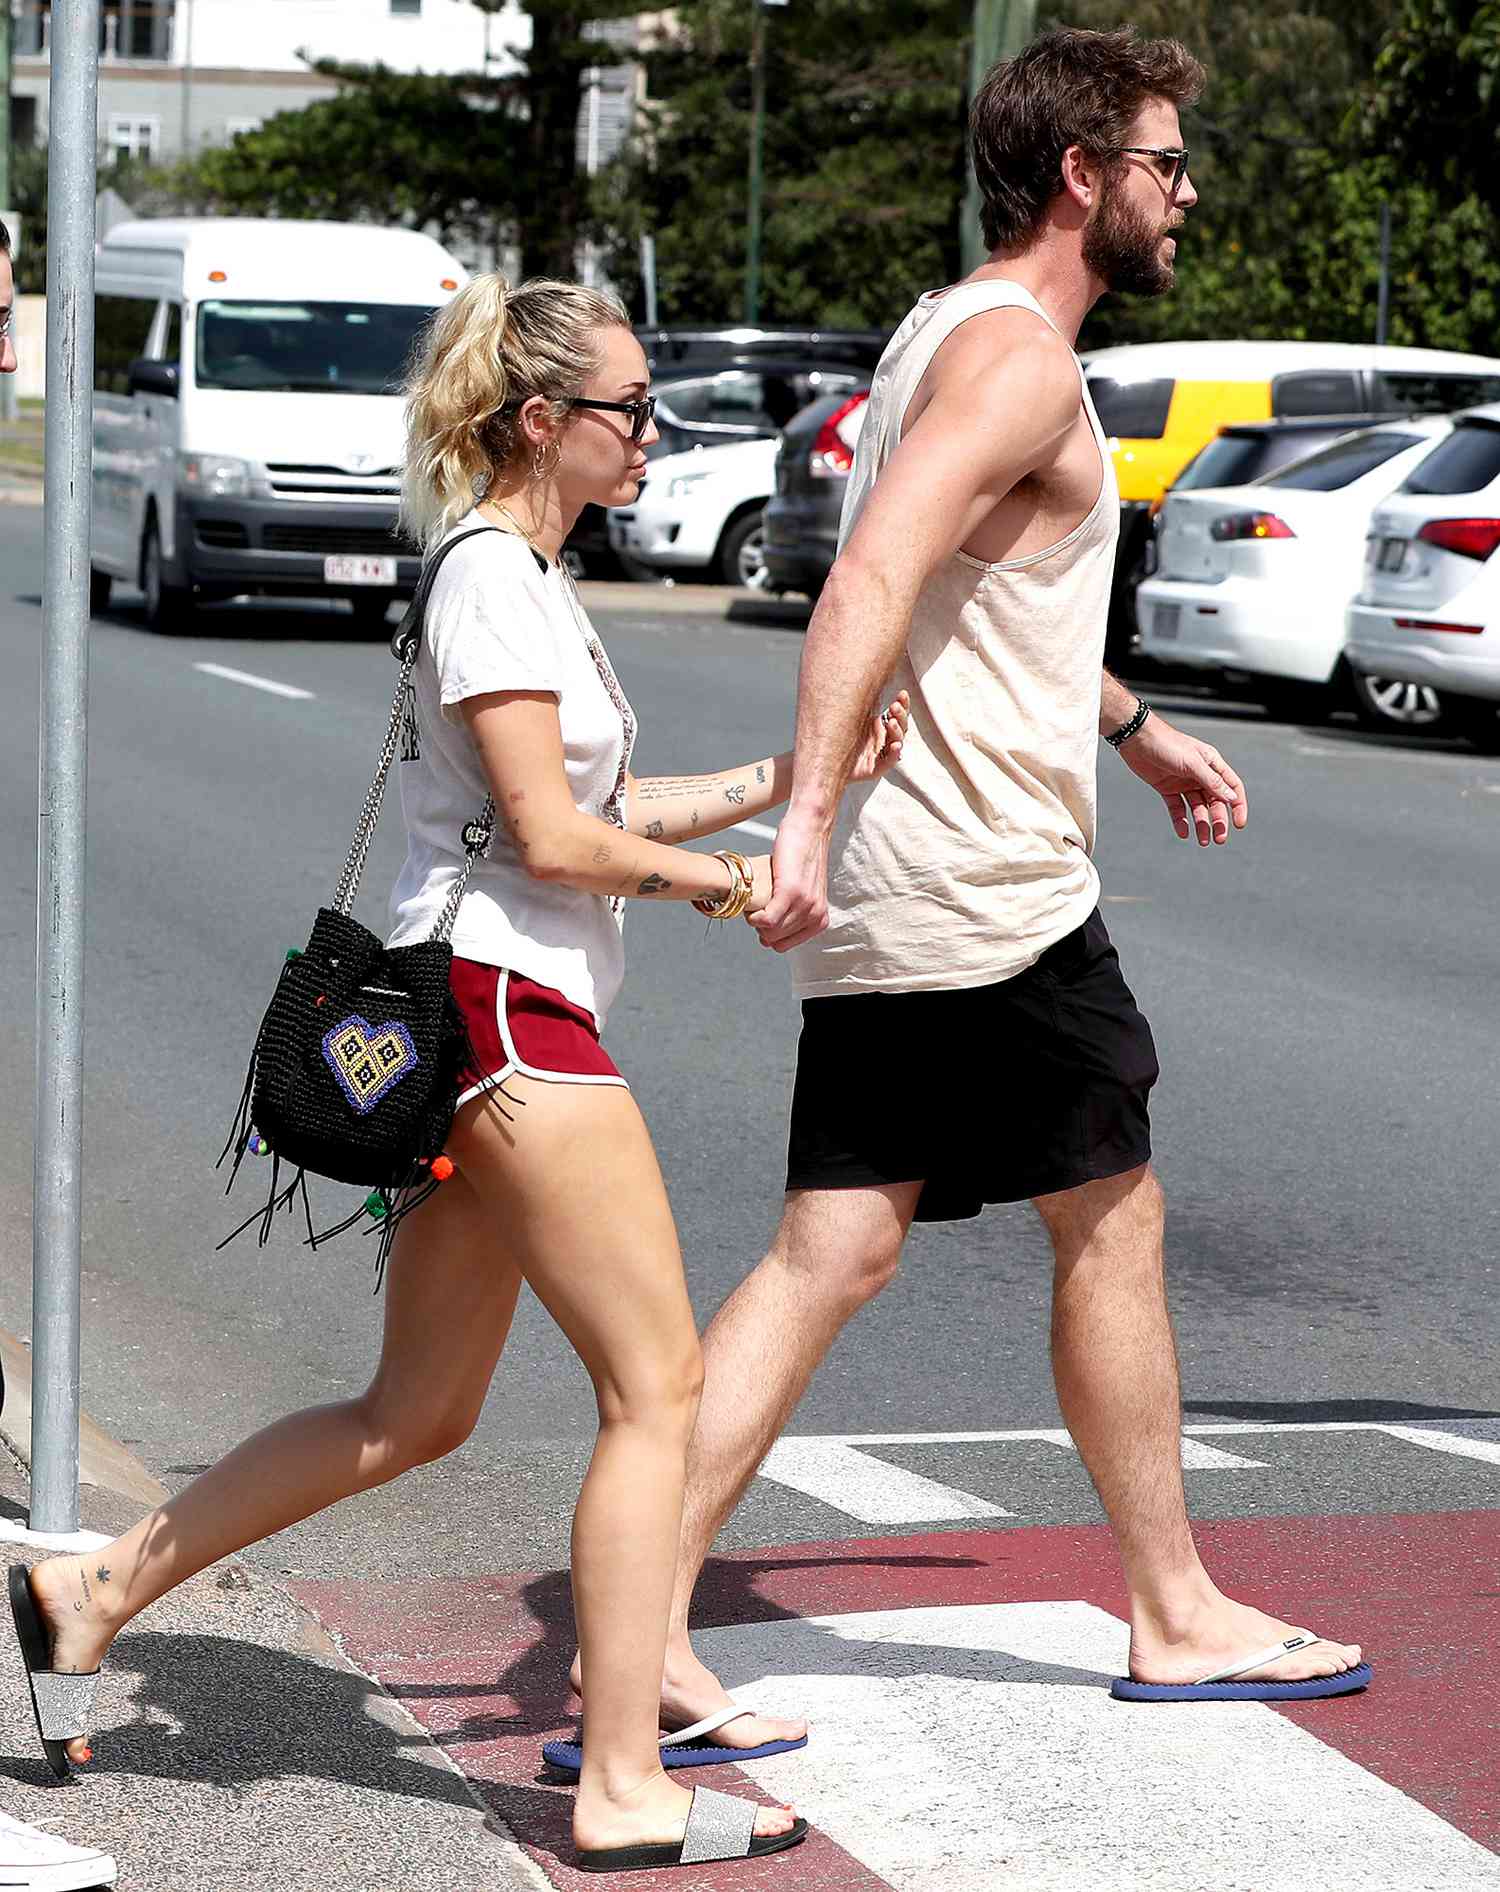 Liam Hemsworth And Miley Cyrus Sighting At Burleigh Heads - January 11, 2018